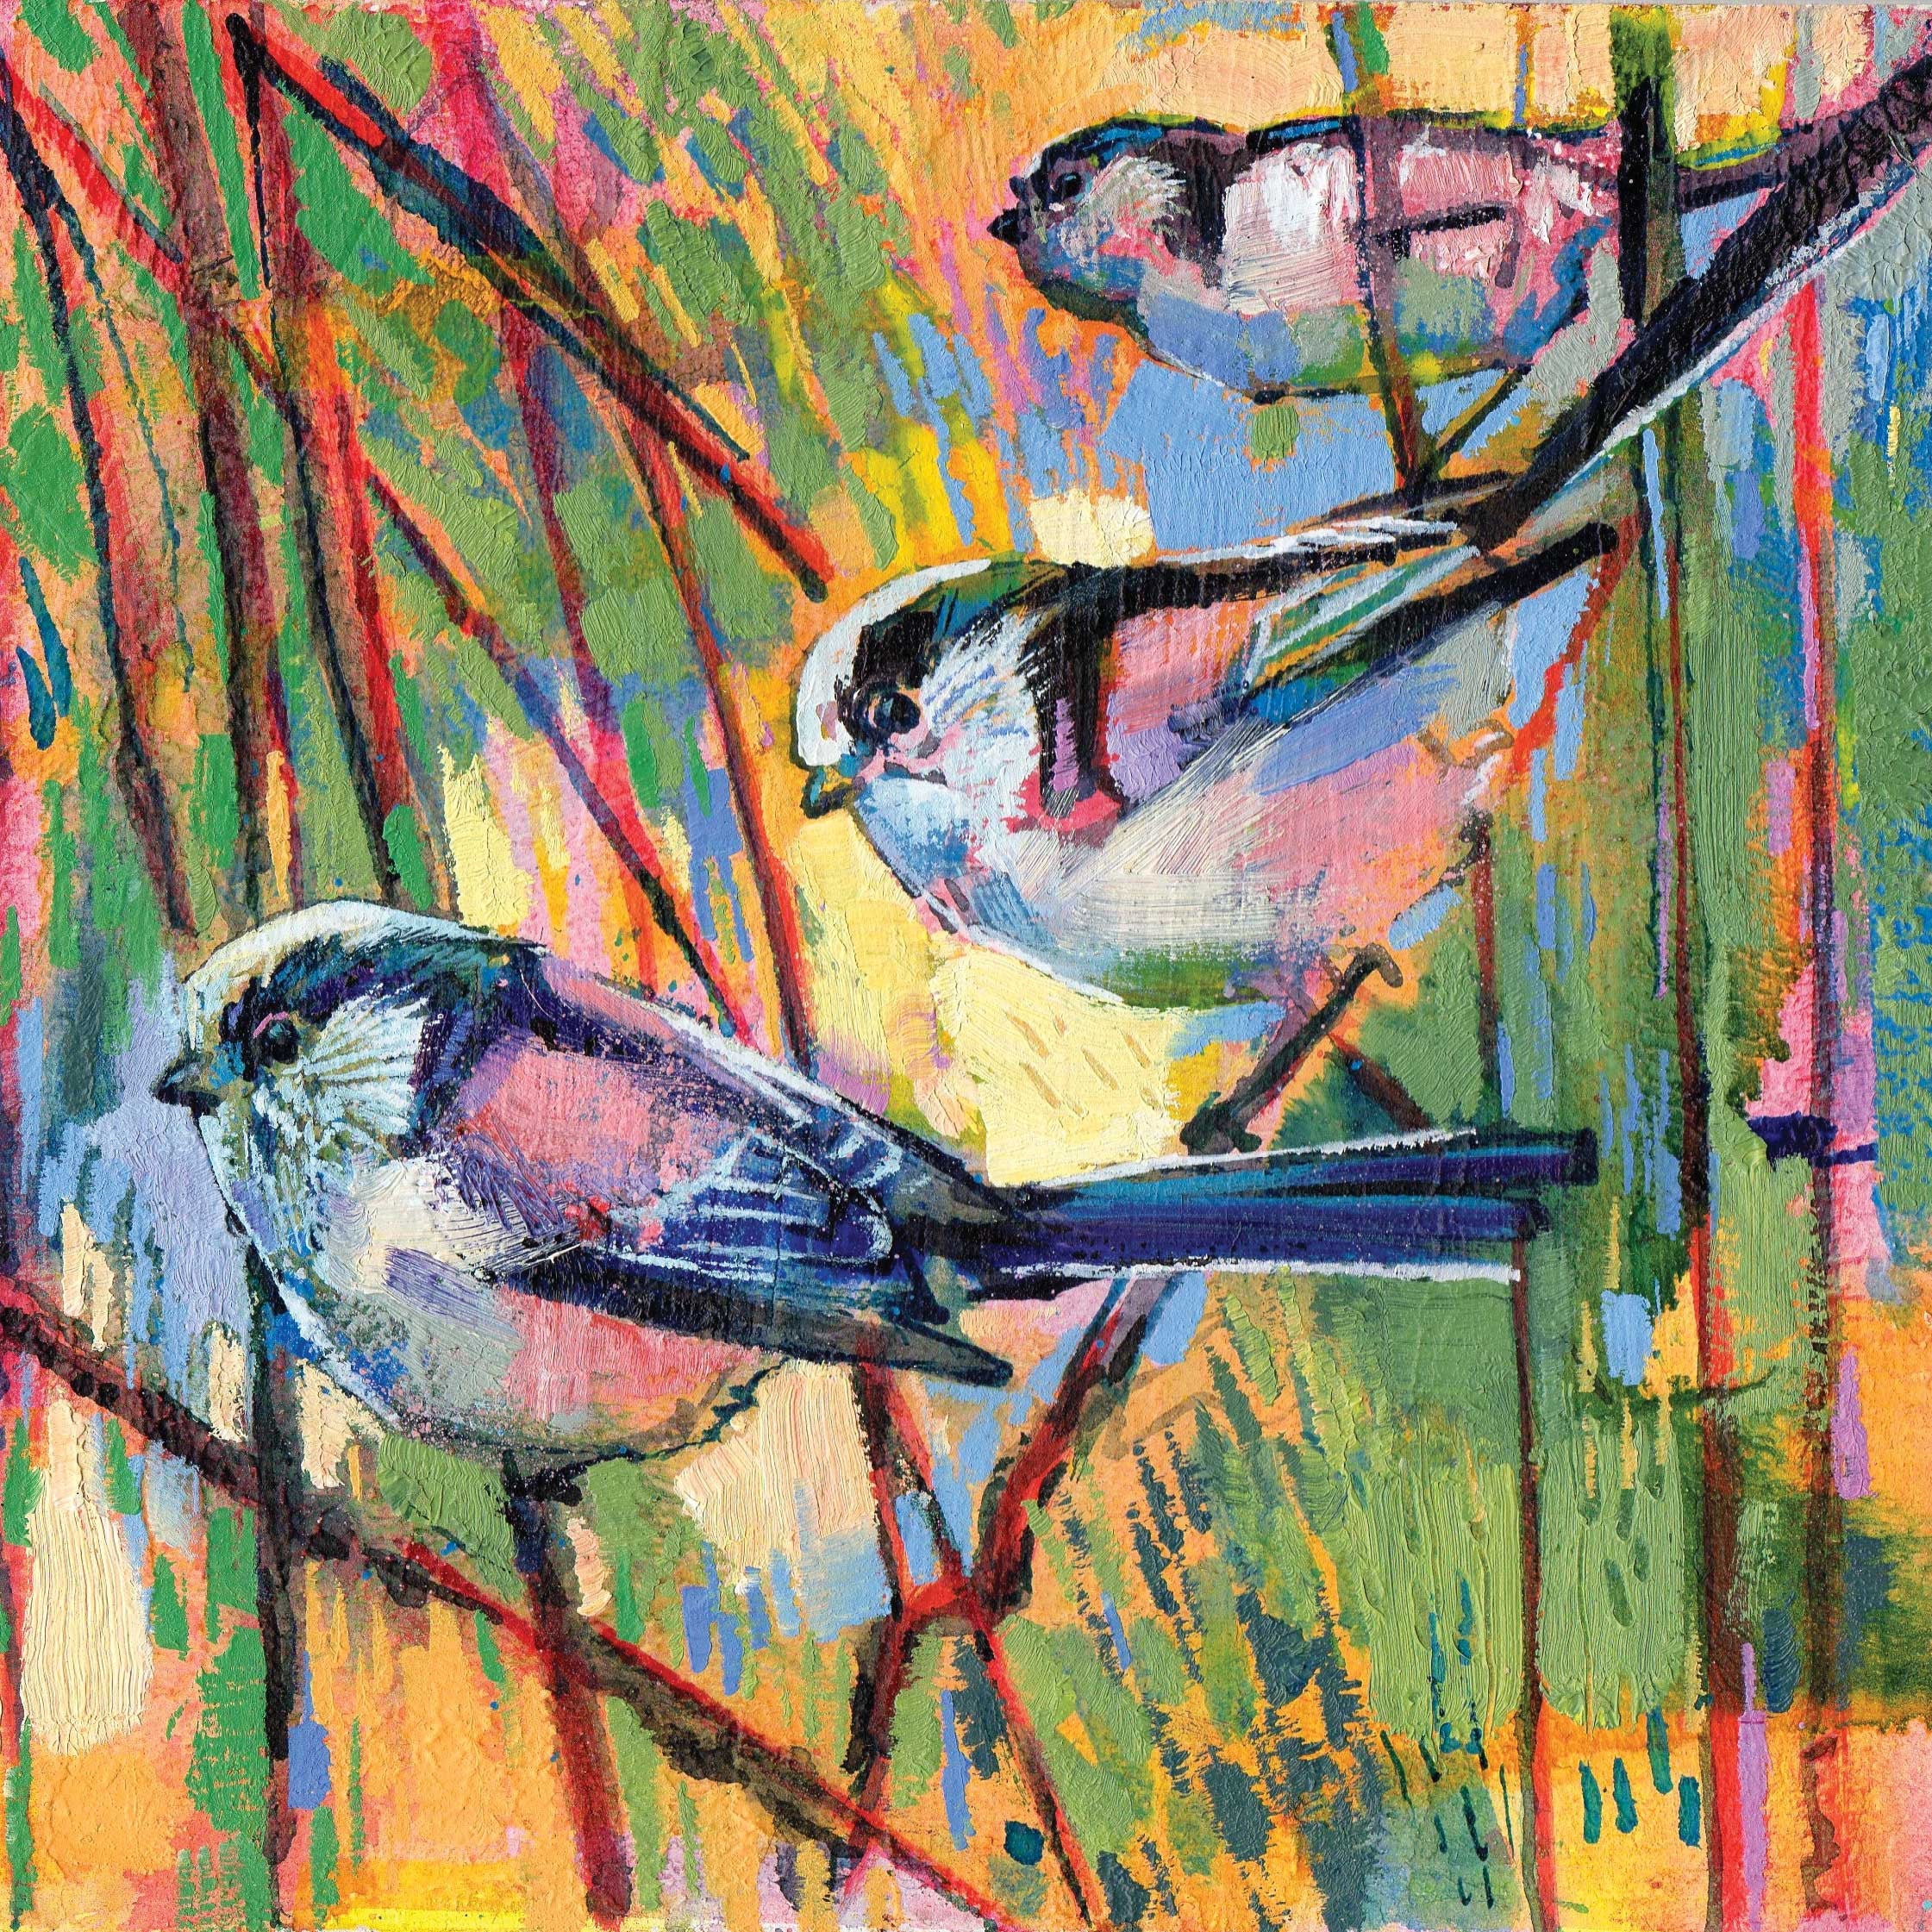 Long Tailed Tits by Daniel Cole, Fine Art Greeting Card, Oil on Board, Three long tailed tits